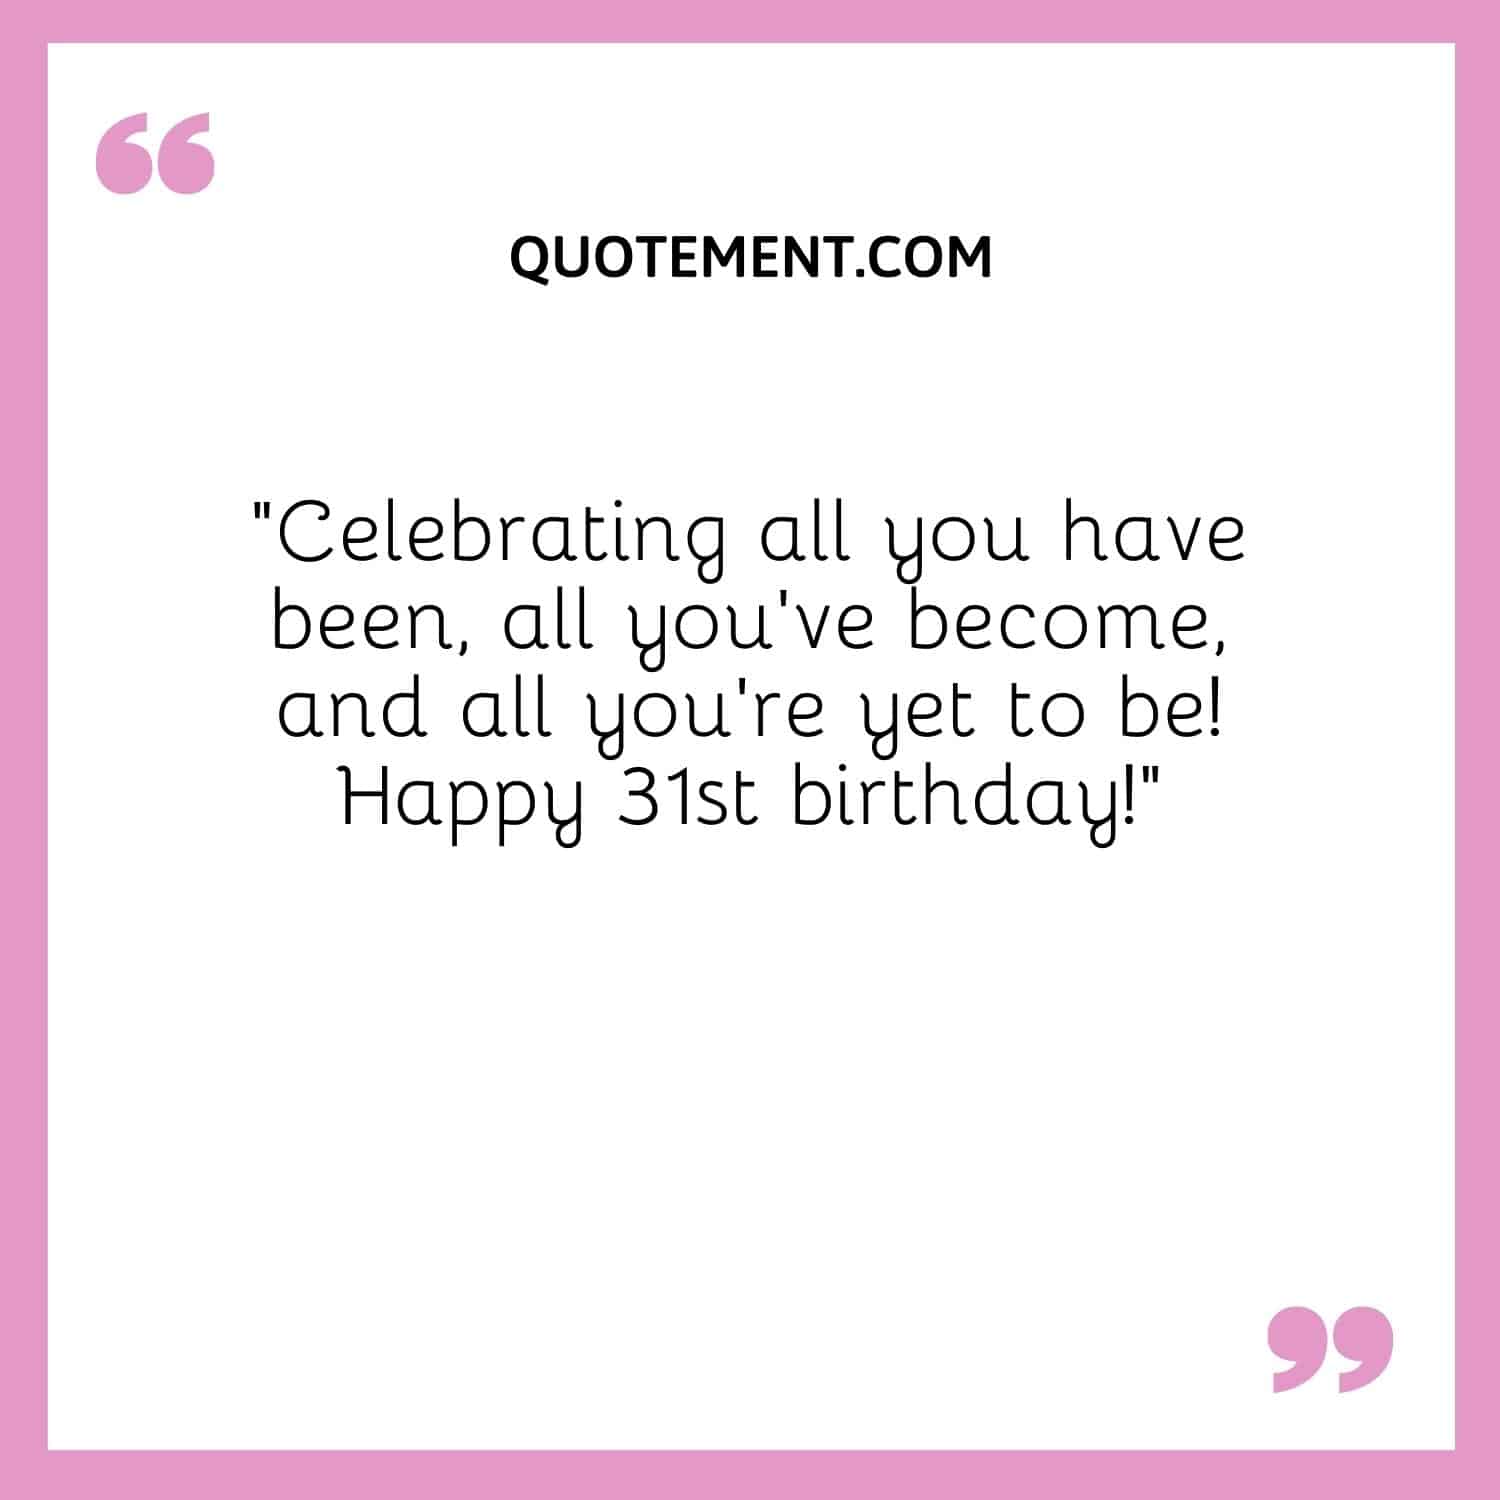 Celebrating all you have been, all you’ve become, and all you’re yet to be!